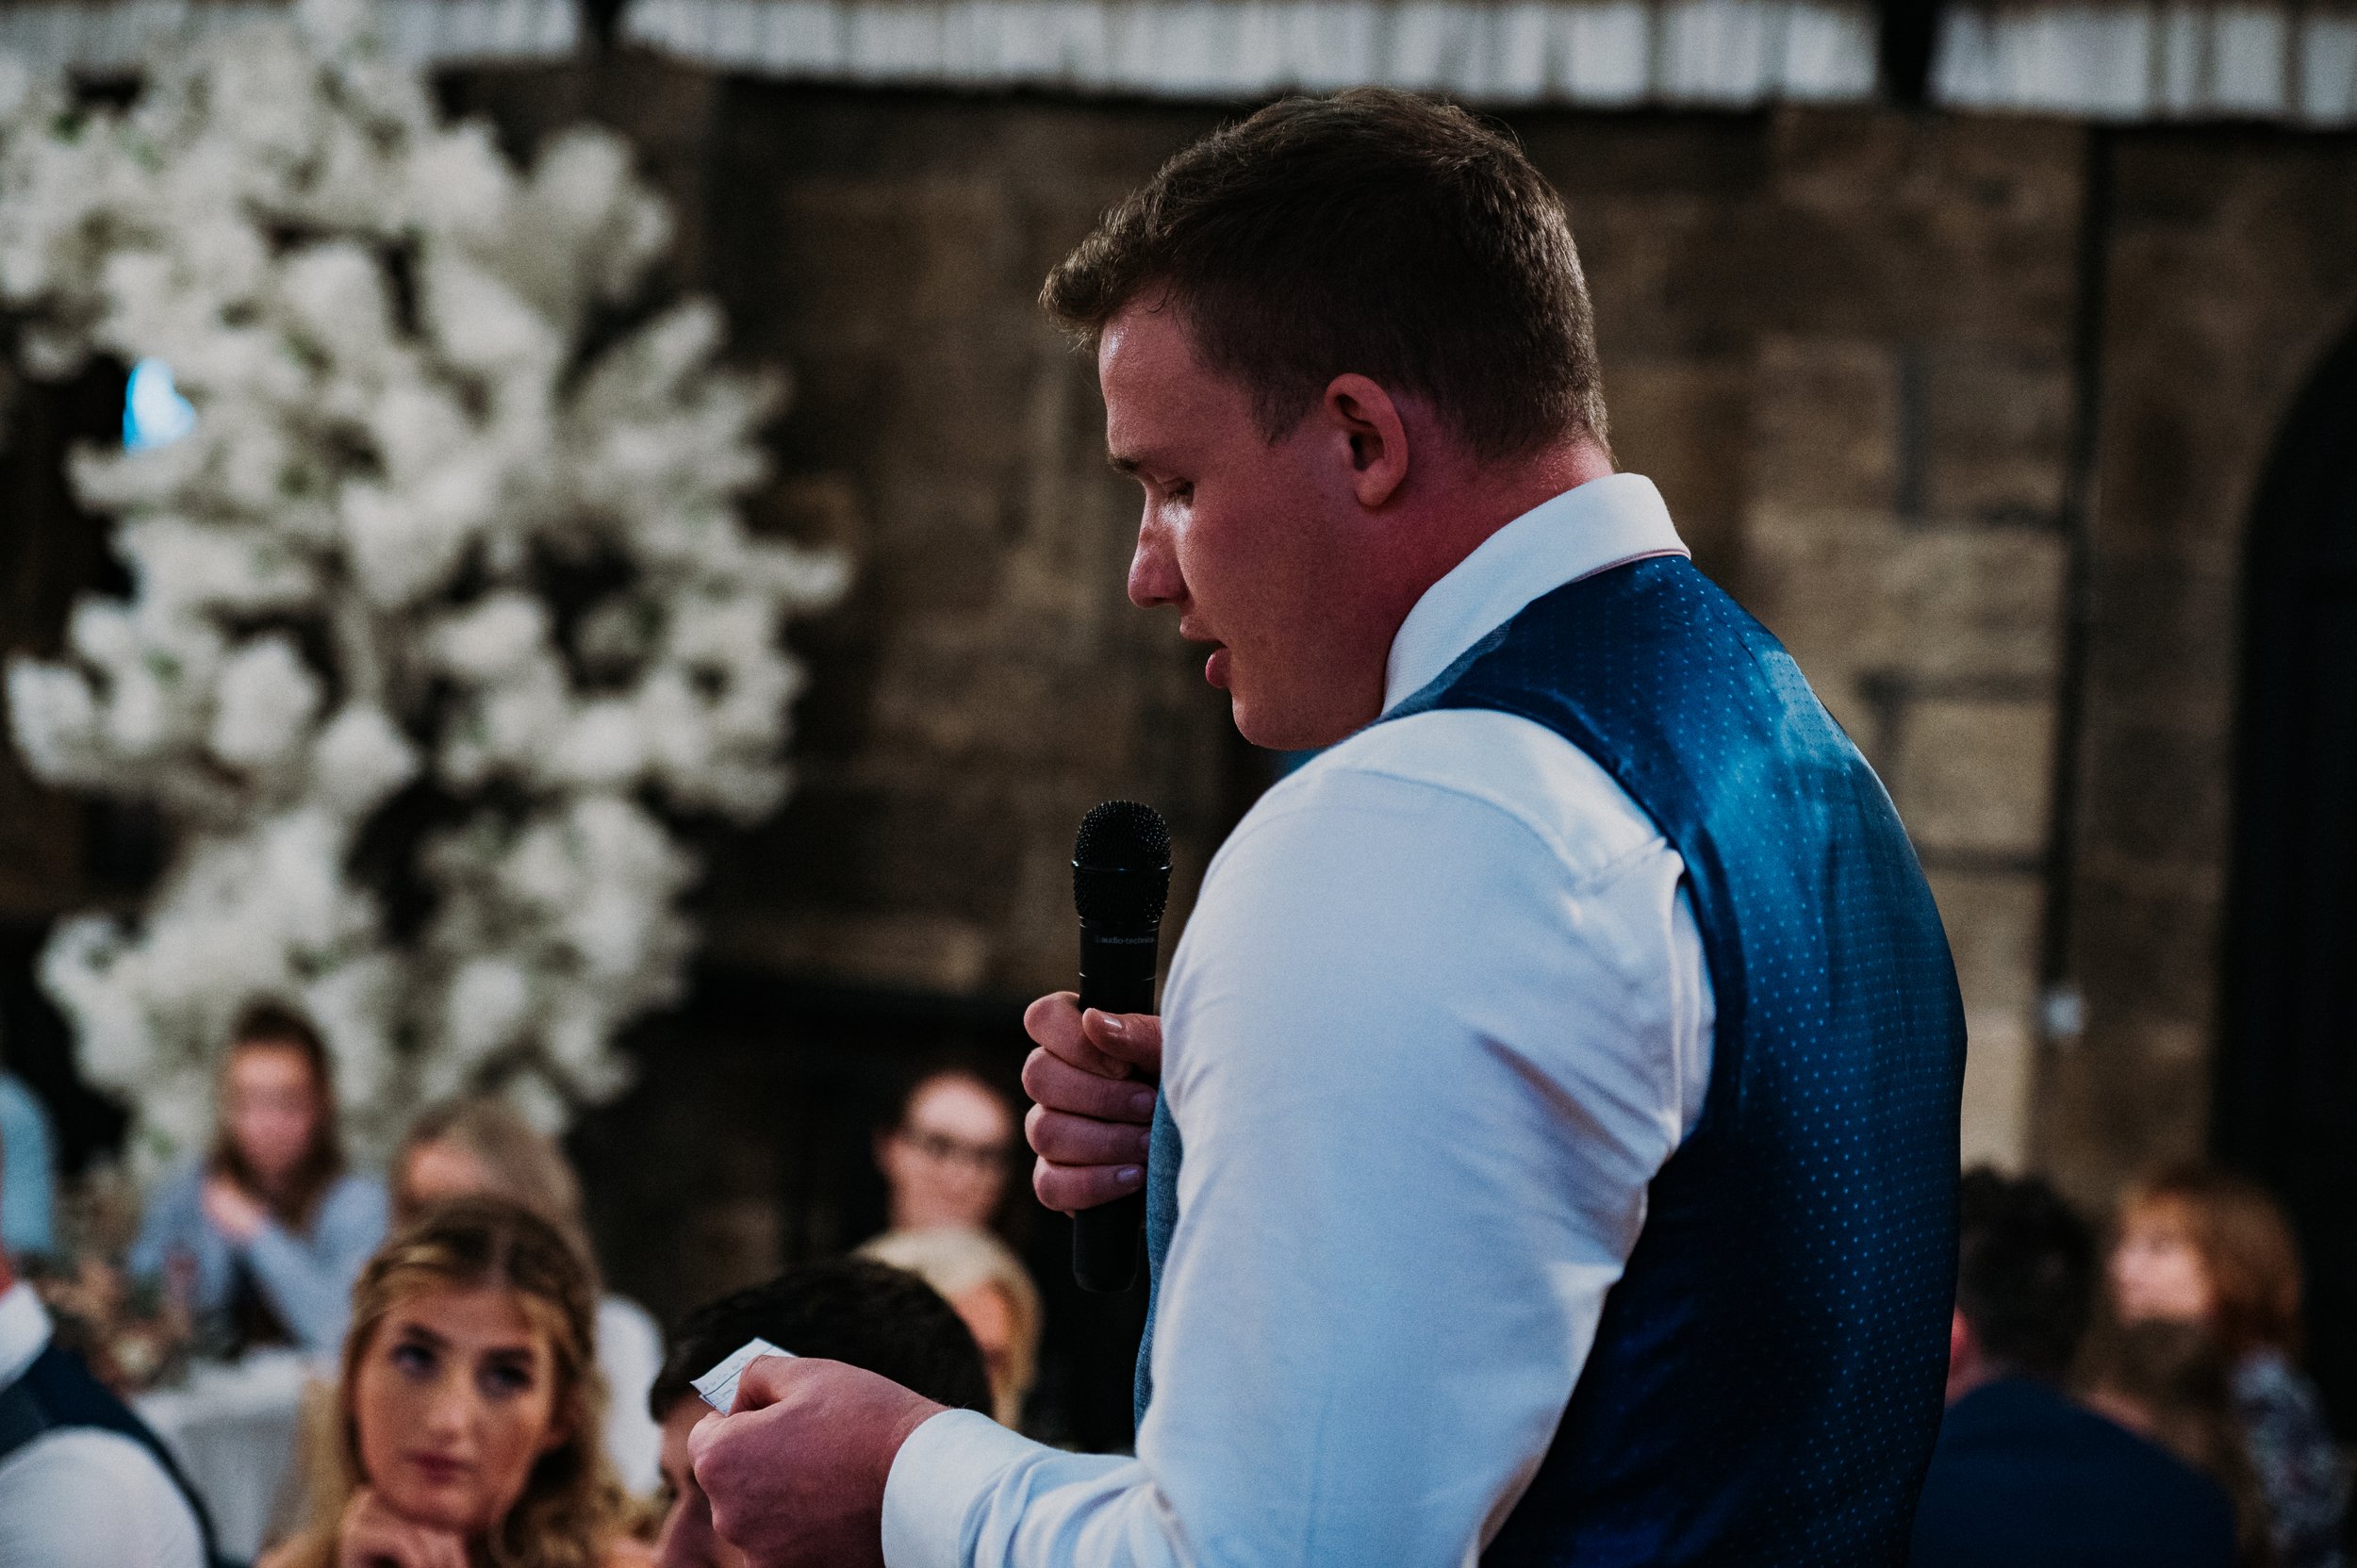 The groom's friend and second best man giving his speech after the meal at Sneaton Castle, Whitby.